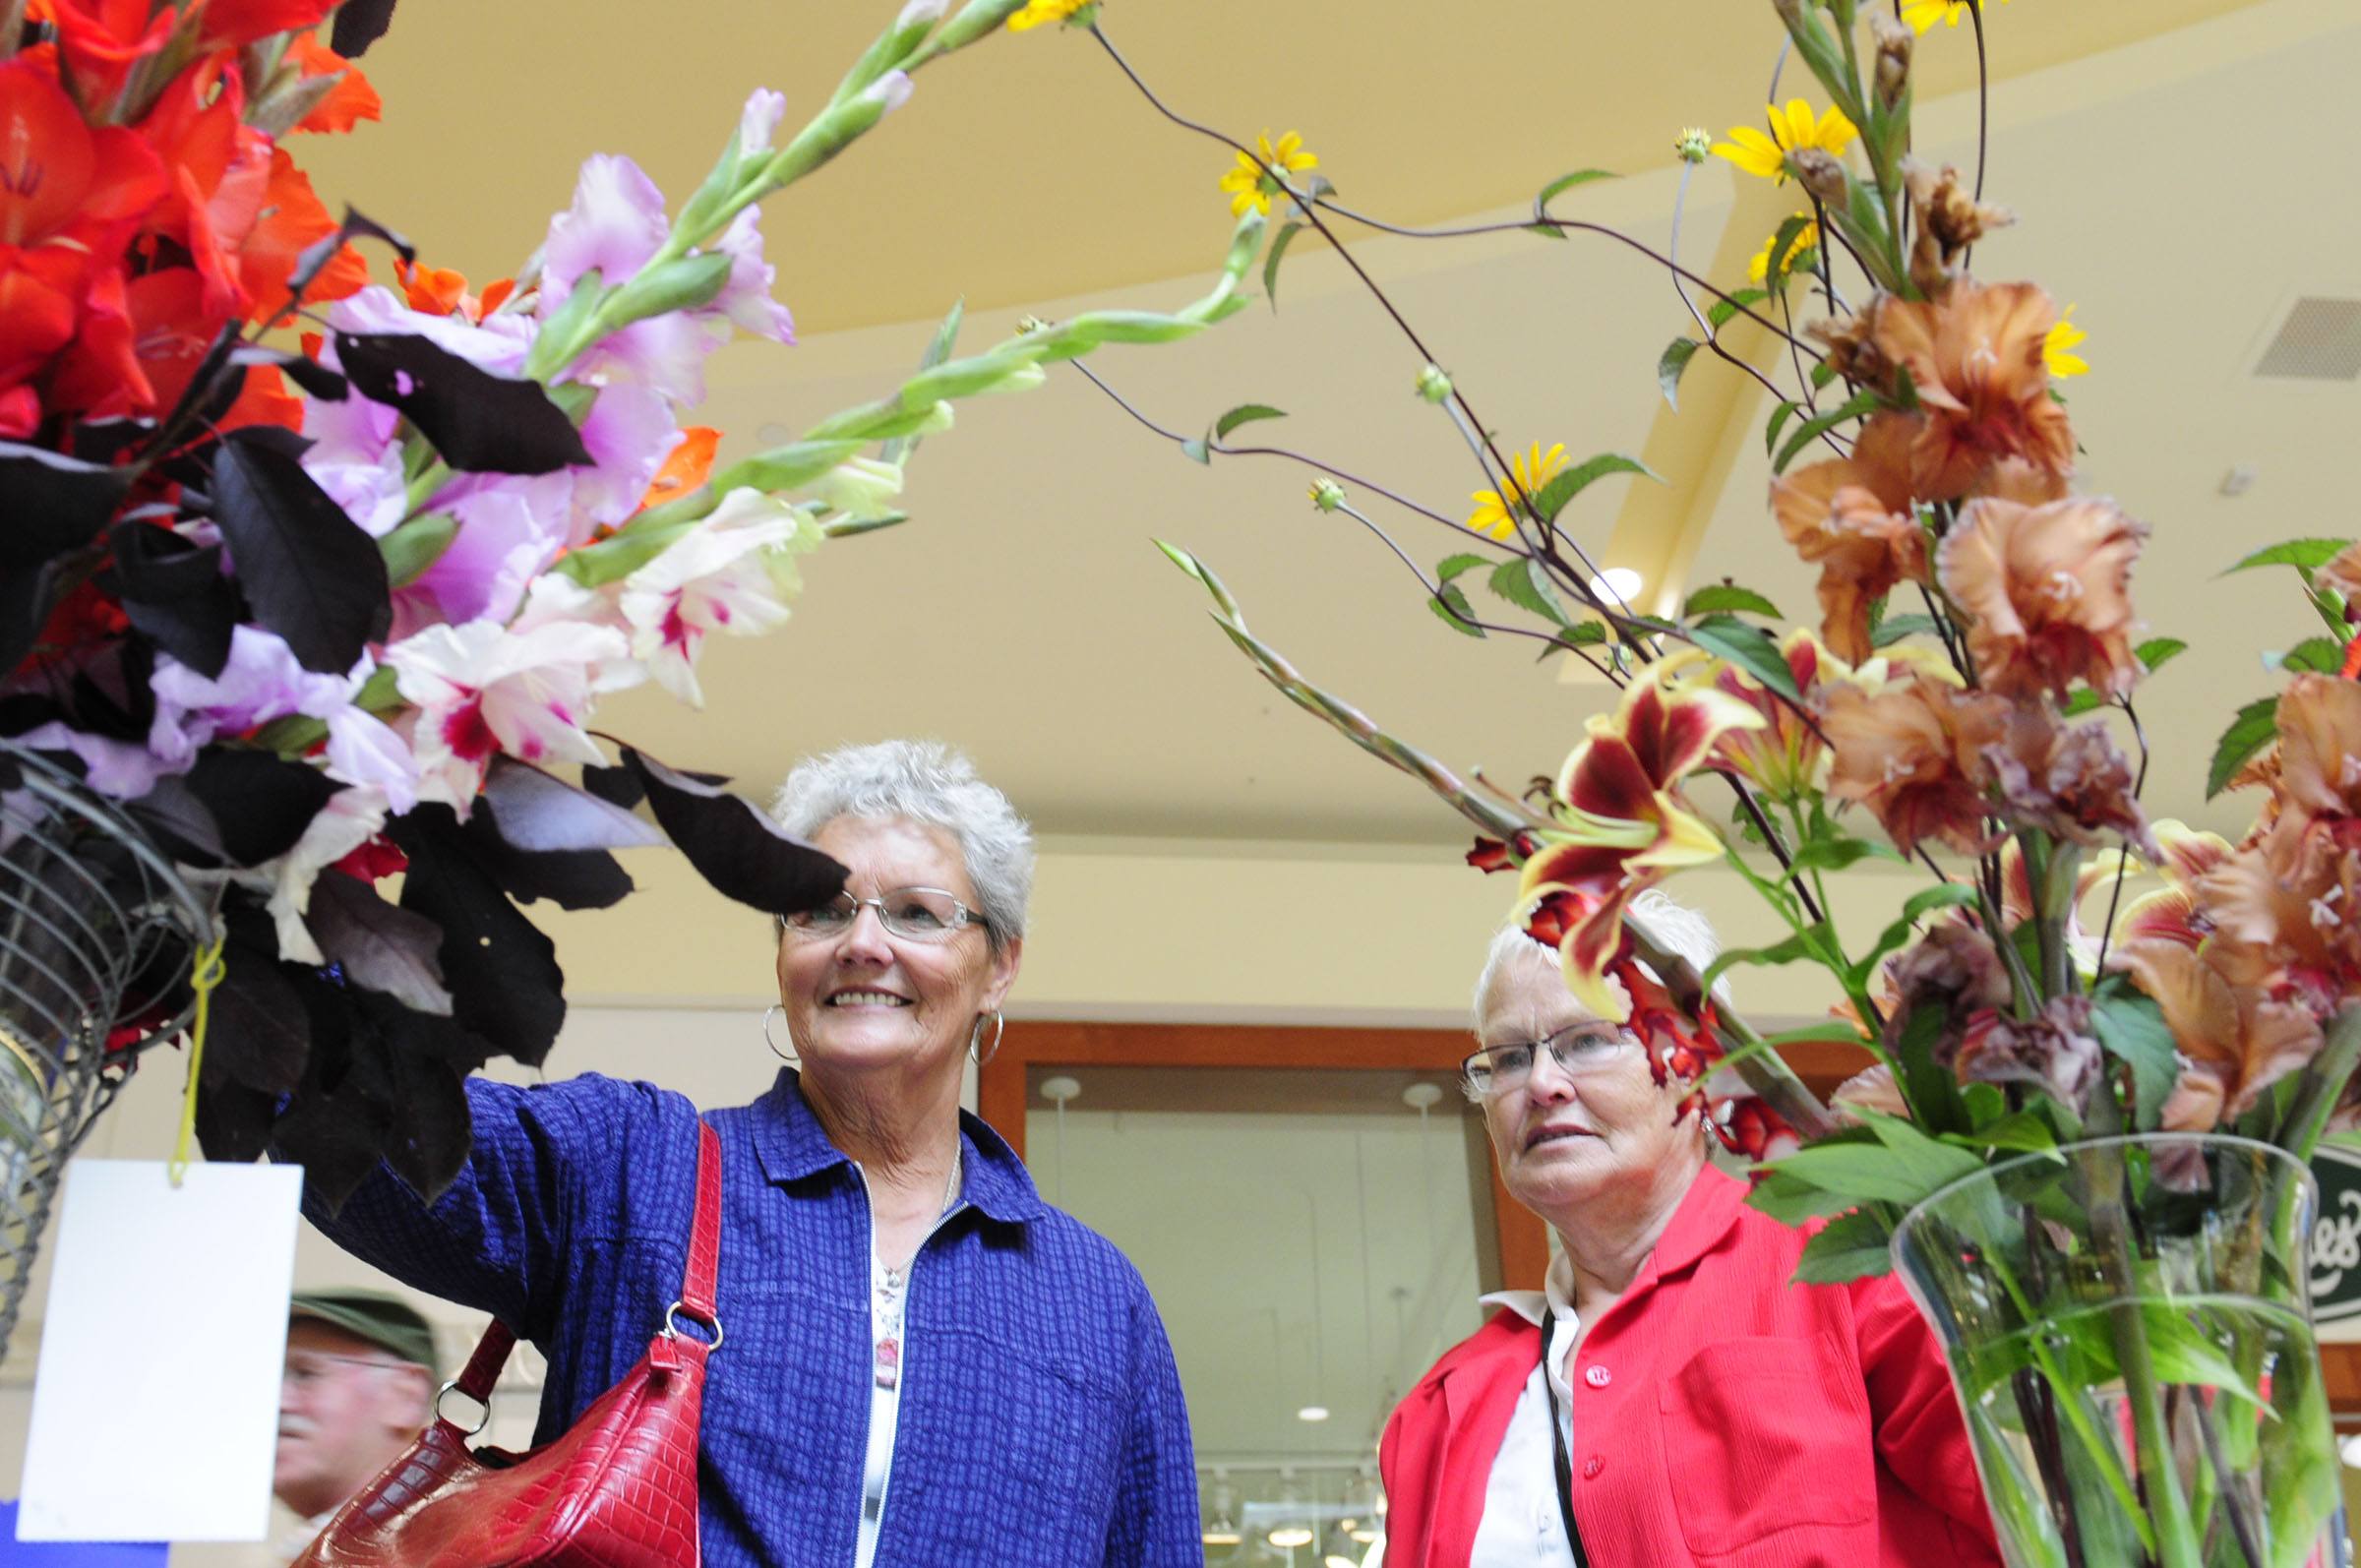 Nancy Gordon and Gail Pugh enjoy the colourful flower arrangements Saturday during the flower show at the Bower Mall in Red Deer.